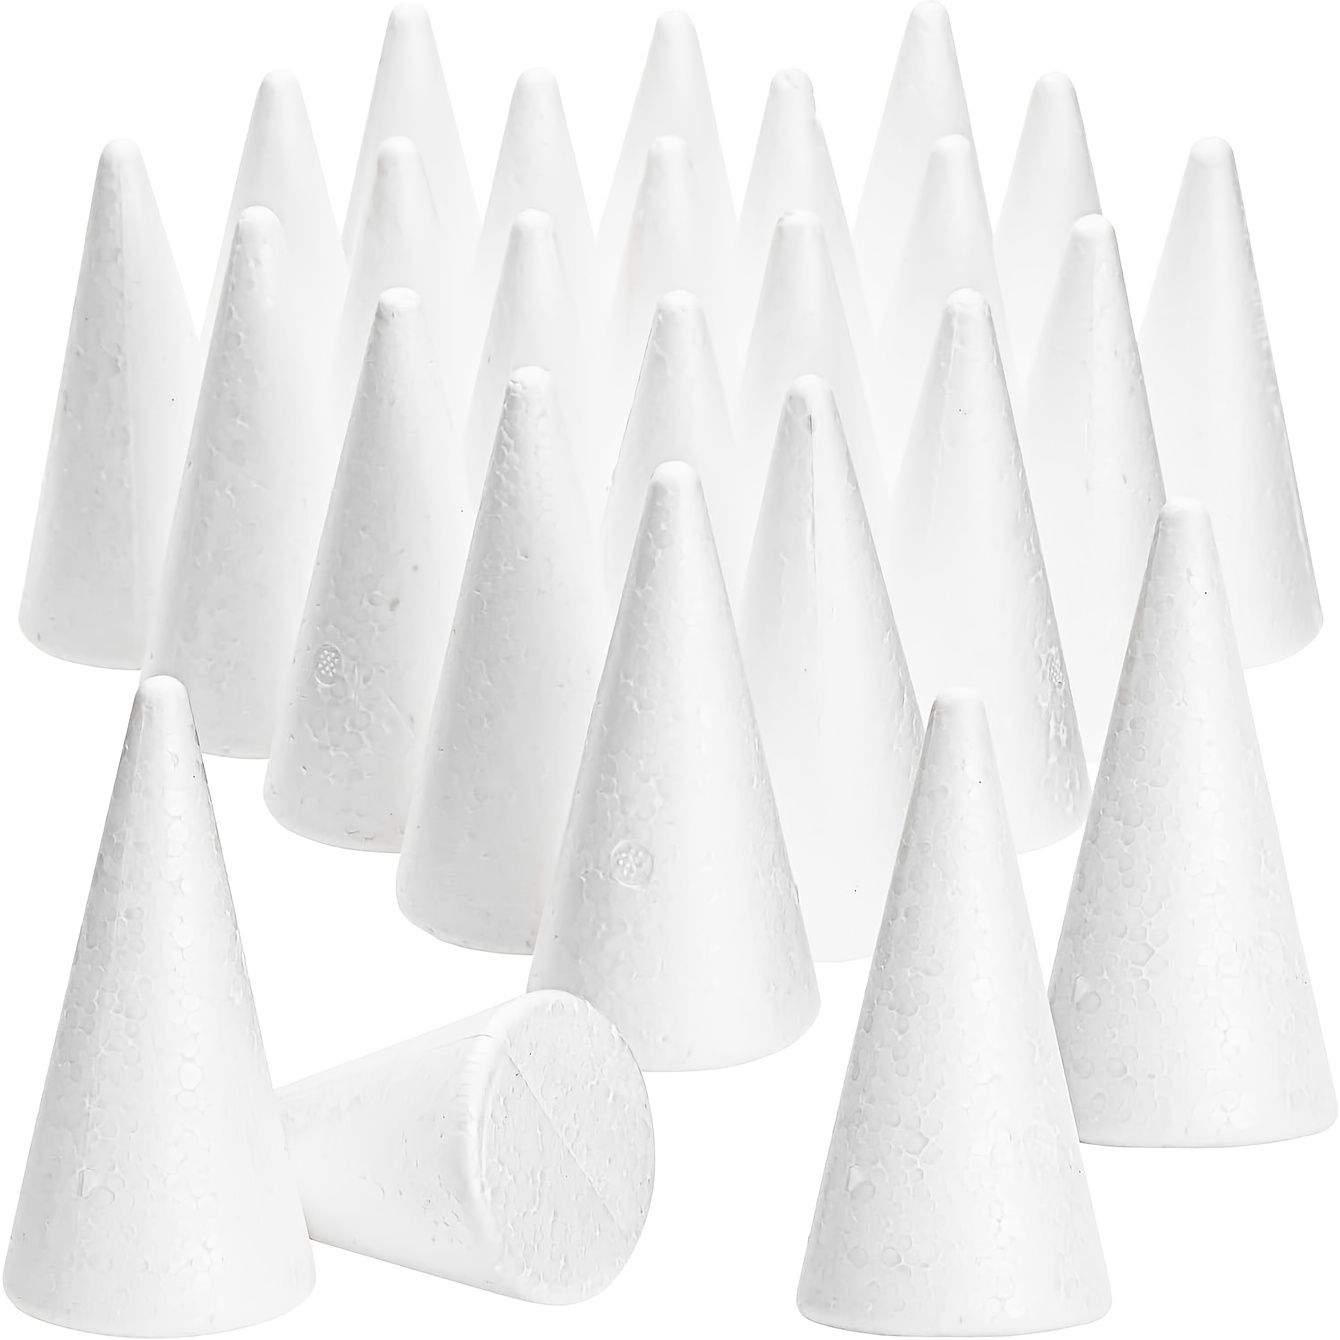 Craft Foam Cones 20-Pack (2.5X5.9in), White Polystyrene Cone Shaped Foam, Foam Tree Cones, for Arts and Crafts, Christmas, School, Wedding, Birthday